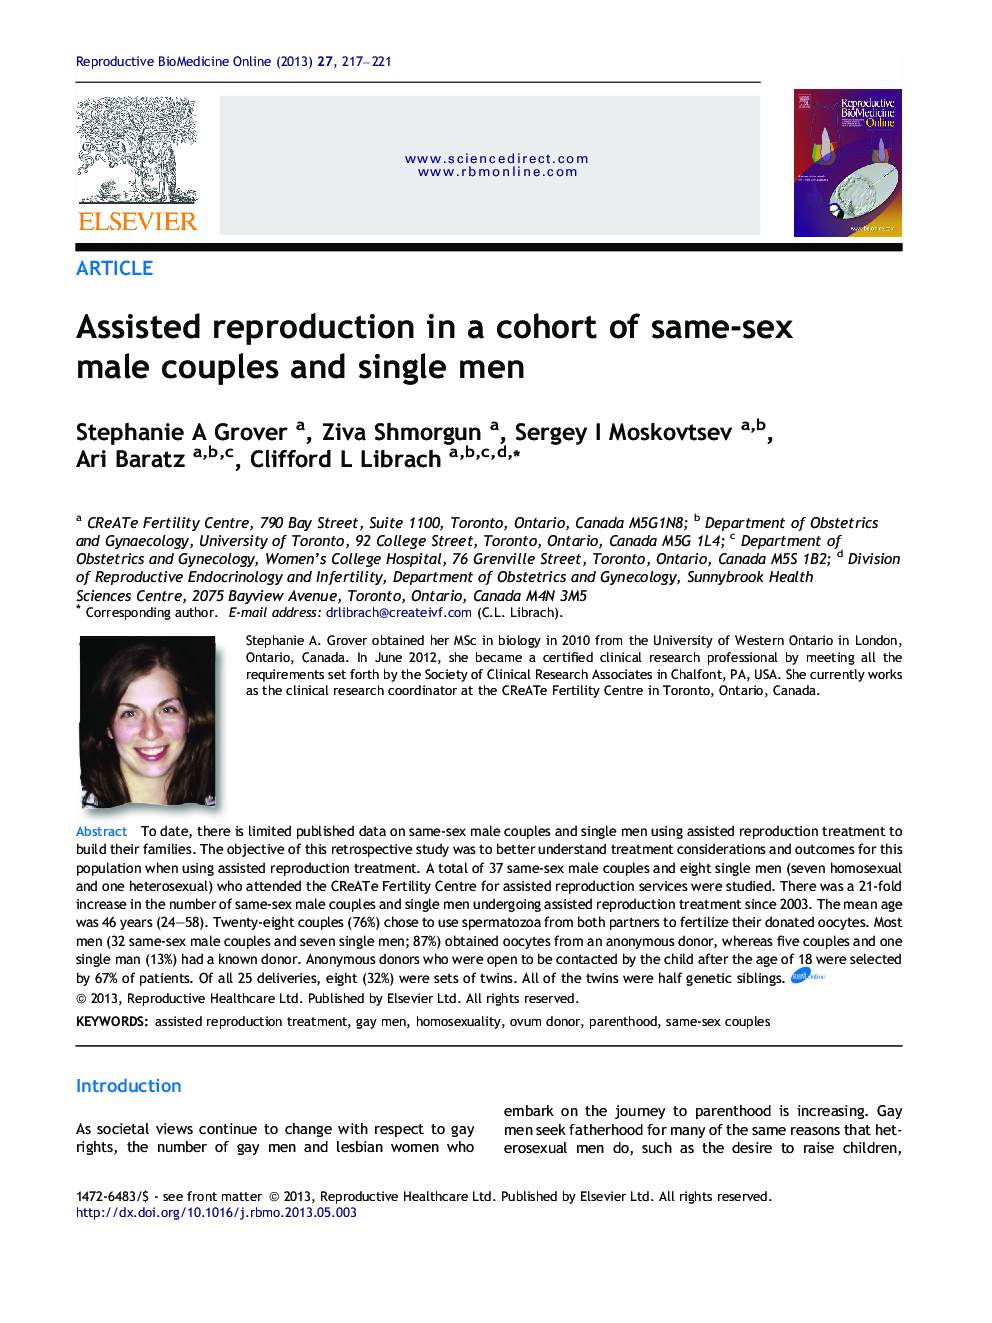 Assisted reproduction in a cohort of same-sex male couples and single men 